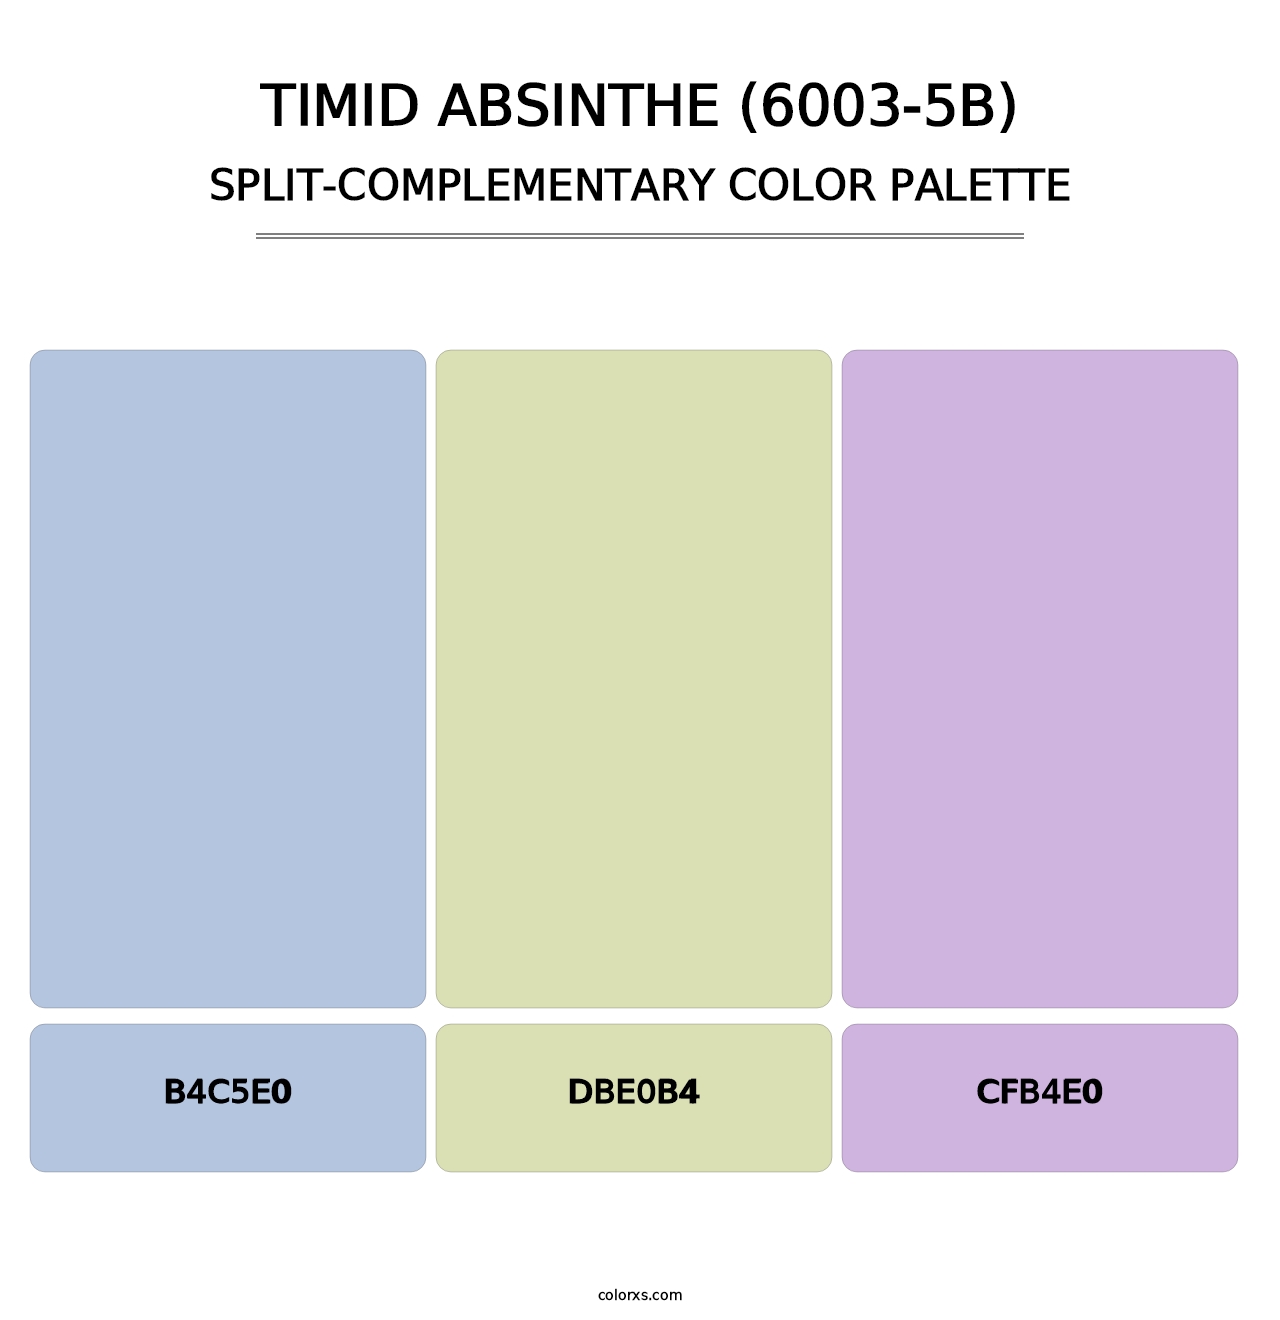 Timid Absinthe (6003-5B) - Split-Complementary Color Palette